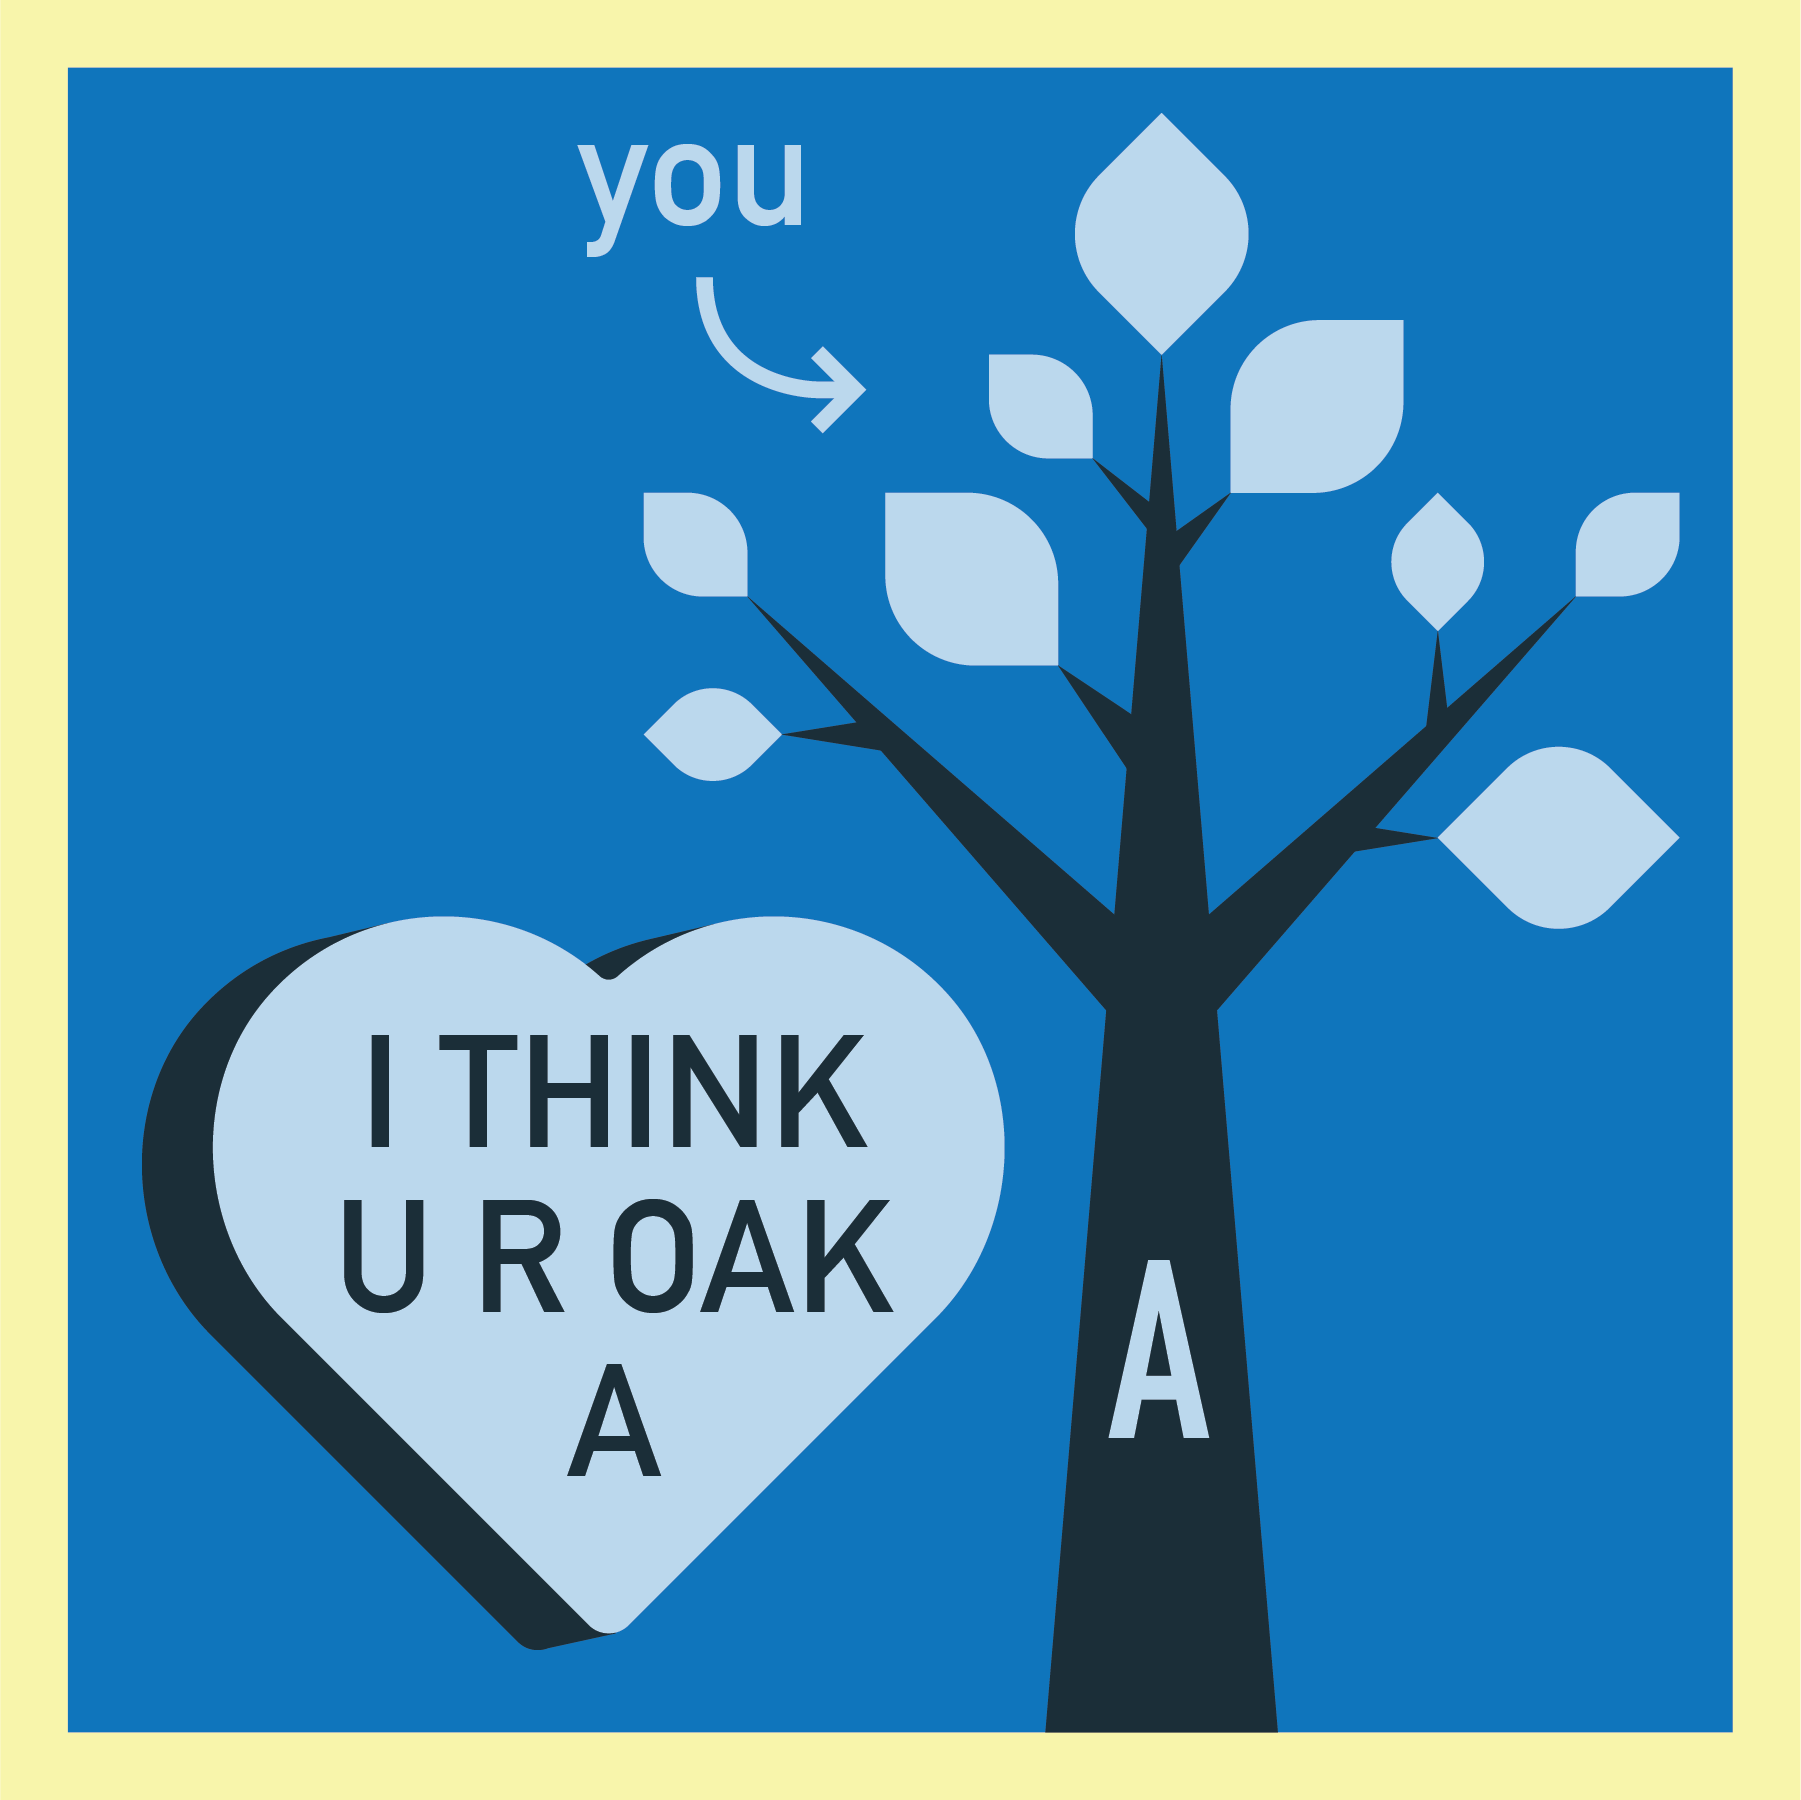 "I think U R OAK A" with a tree with an A on the trunk and an arrow with "you" pointing at the tree.